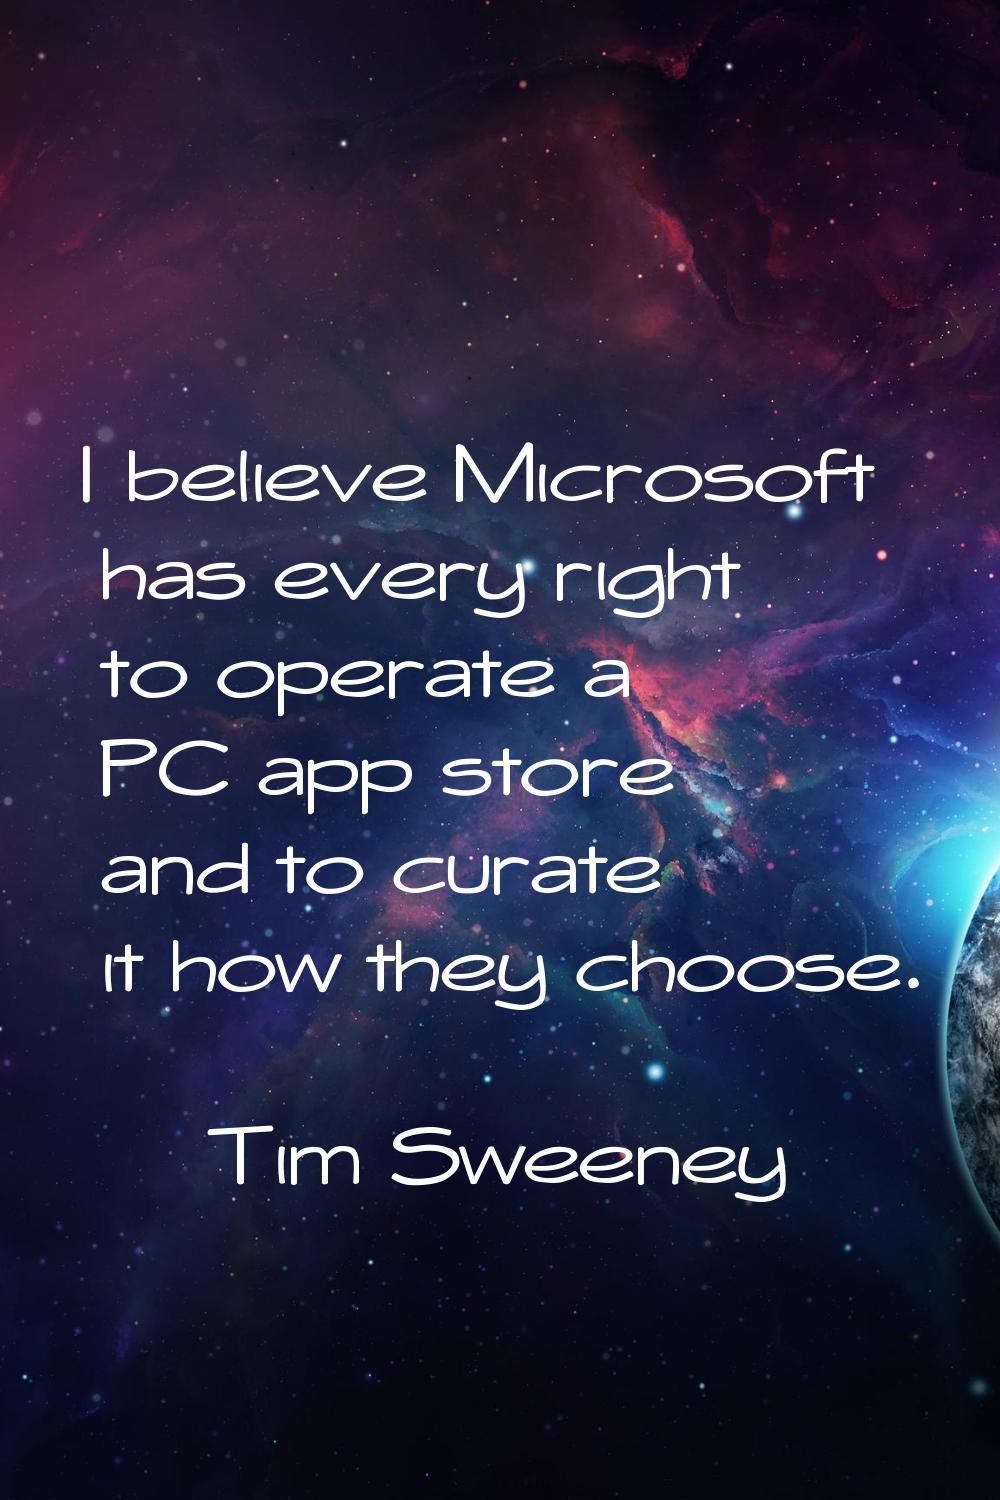 I believe Microsoft has every right to operate a PC app store and to curate it how they choose.